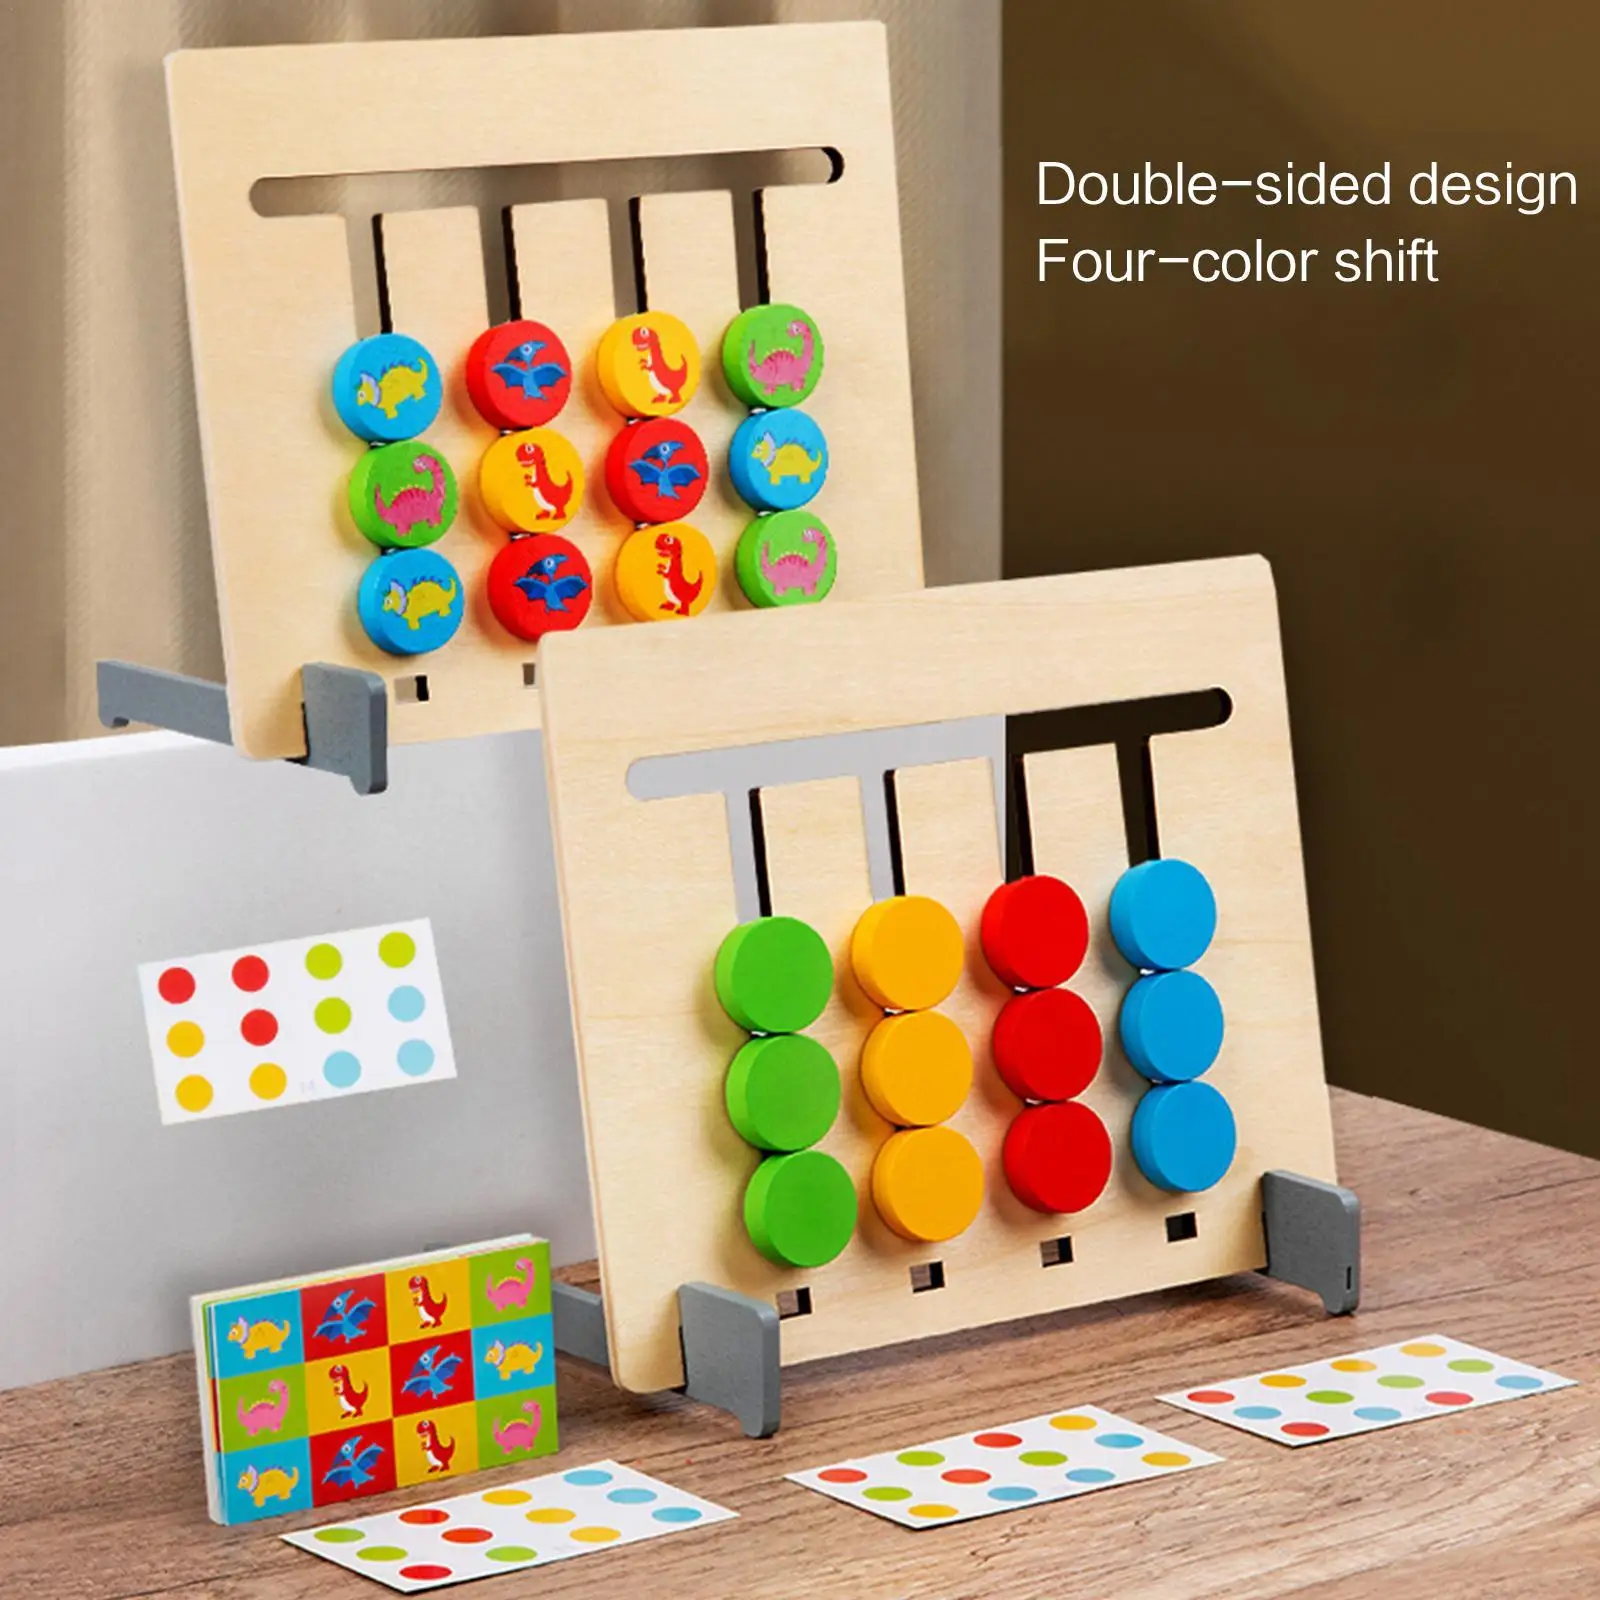 

Four Color Fruit Animal Logic Game Wooden Double-sided Montessori Enlightenment Teaching Kids Children's Educational Toys